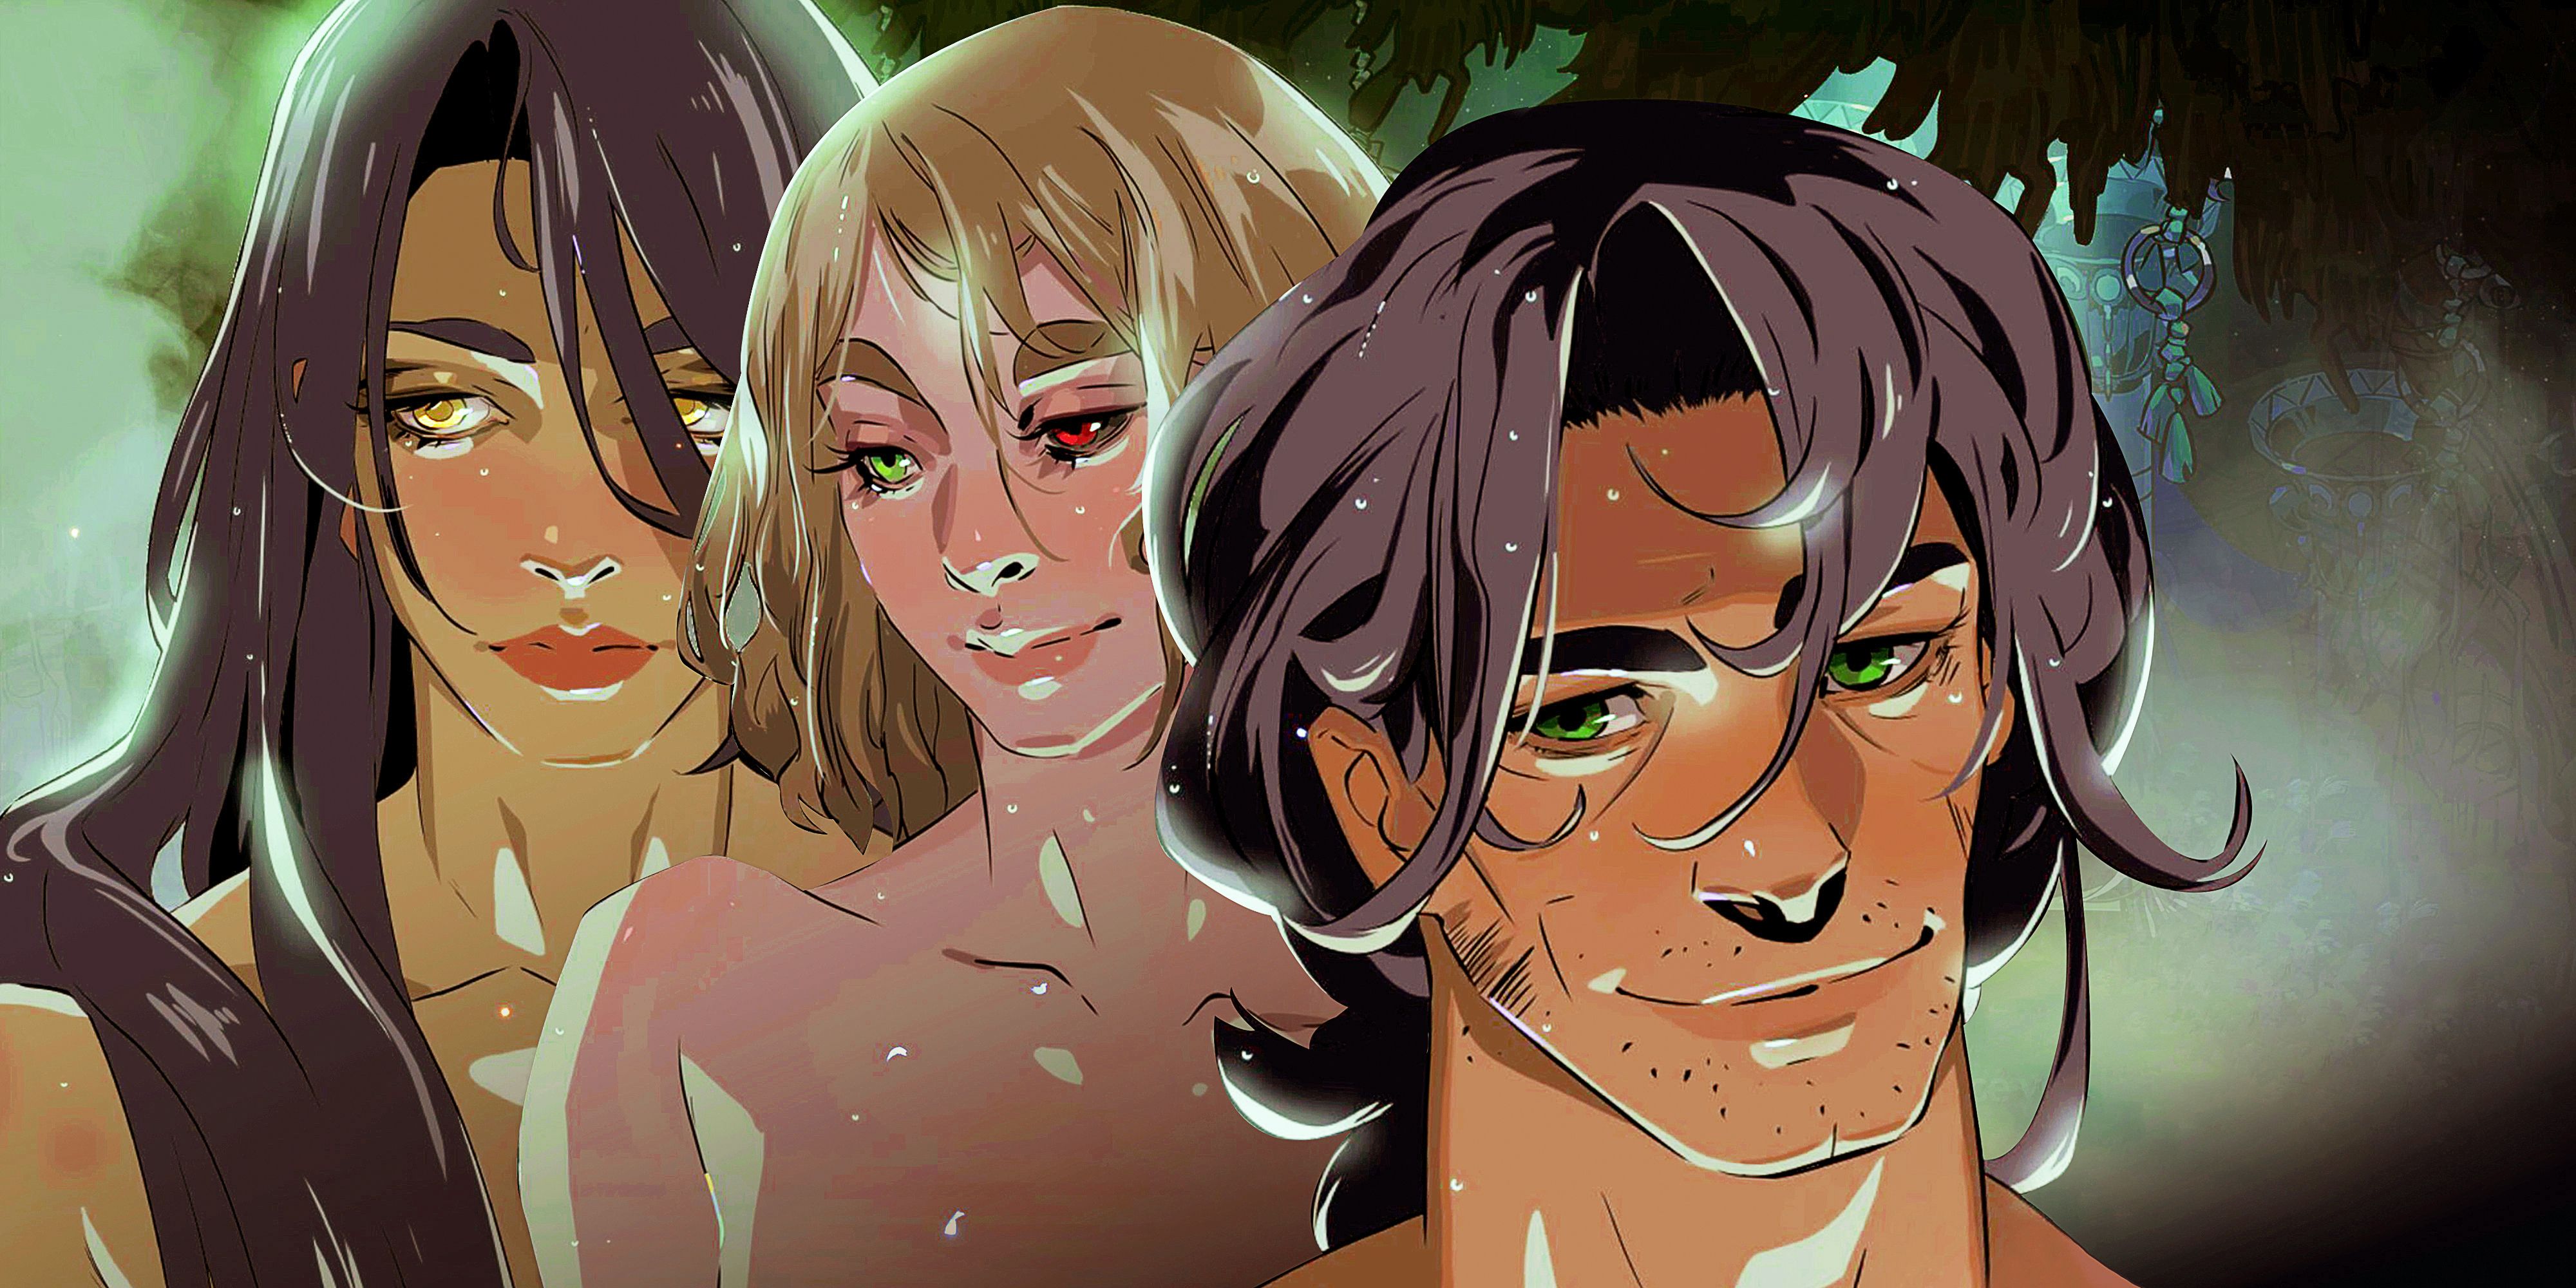 Hades 2's Hot Spring Scenes Are A Bold Subversion Of Fan Service